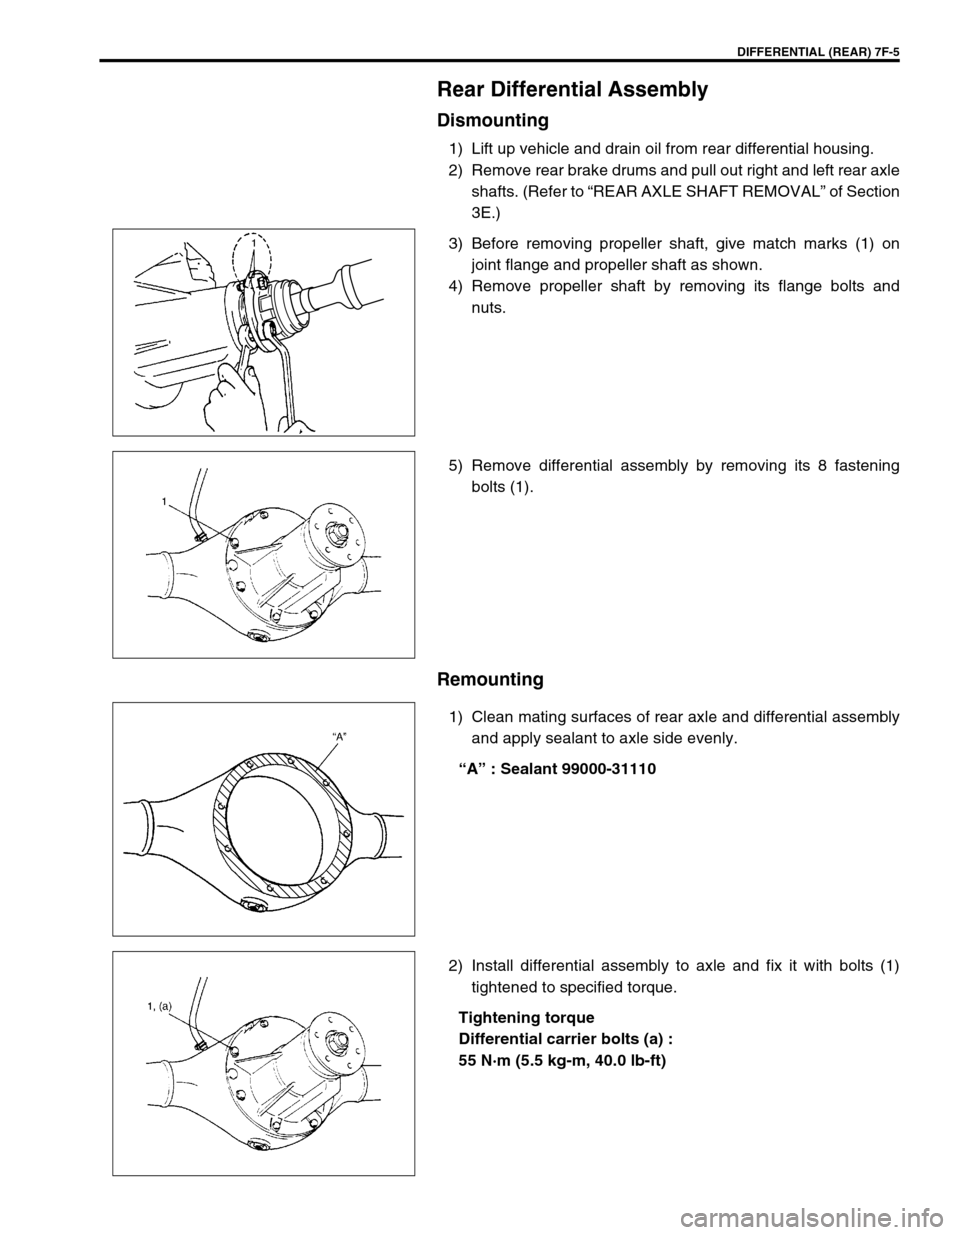 SUZUKI GRAND VITARA 1999 2.G Owners Manual DIFFERENTIAL (REAR) 7F-5
Rear Differential Assembly
Dismounting
1) Lift up vehicle and drain oil from rear differential housing.
2) Remove rear brake drums and pull out right and left rear axle
shafts